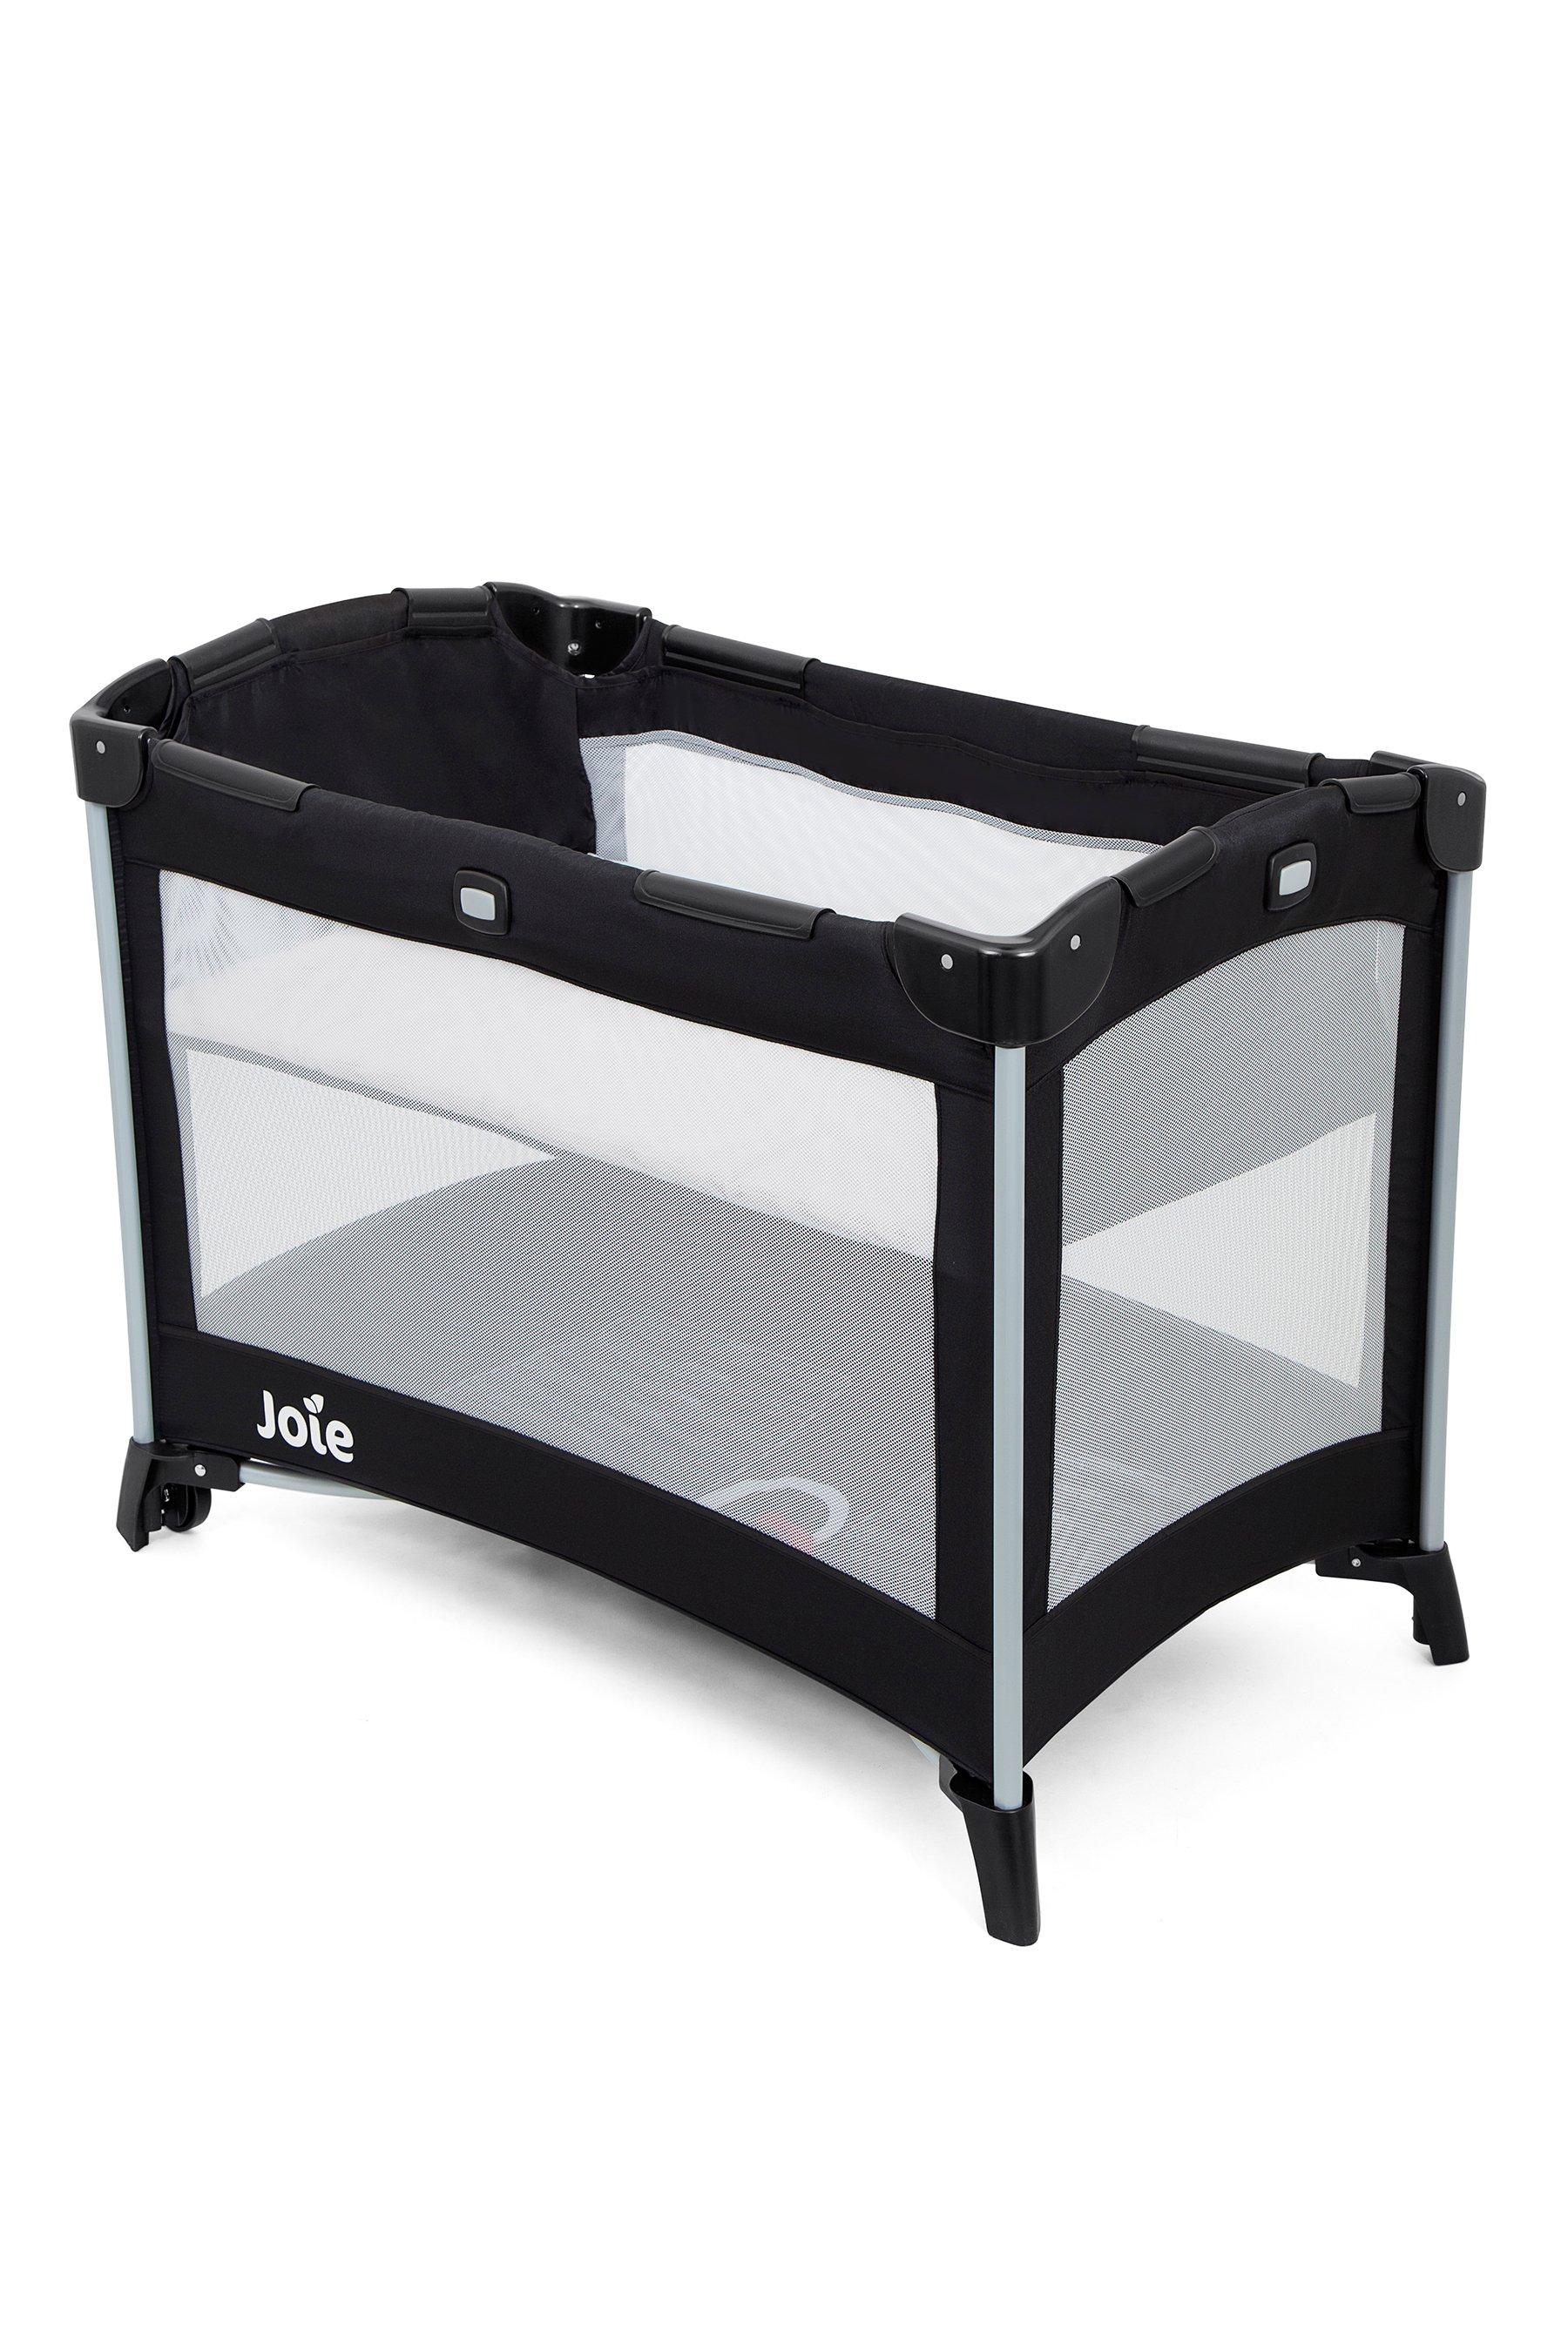 Joie Kubbie Reduced Height Compact Travel Cot – Grey – Fabric